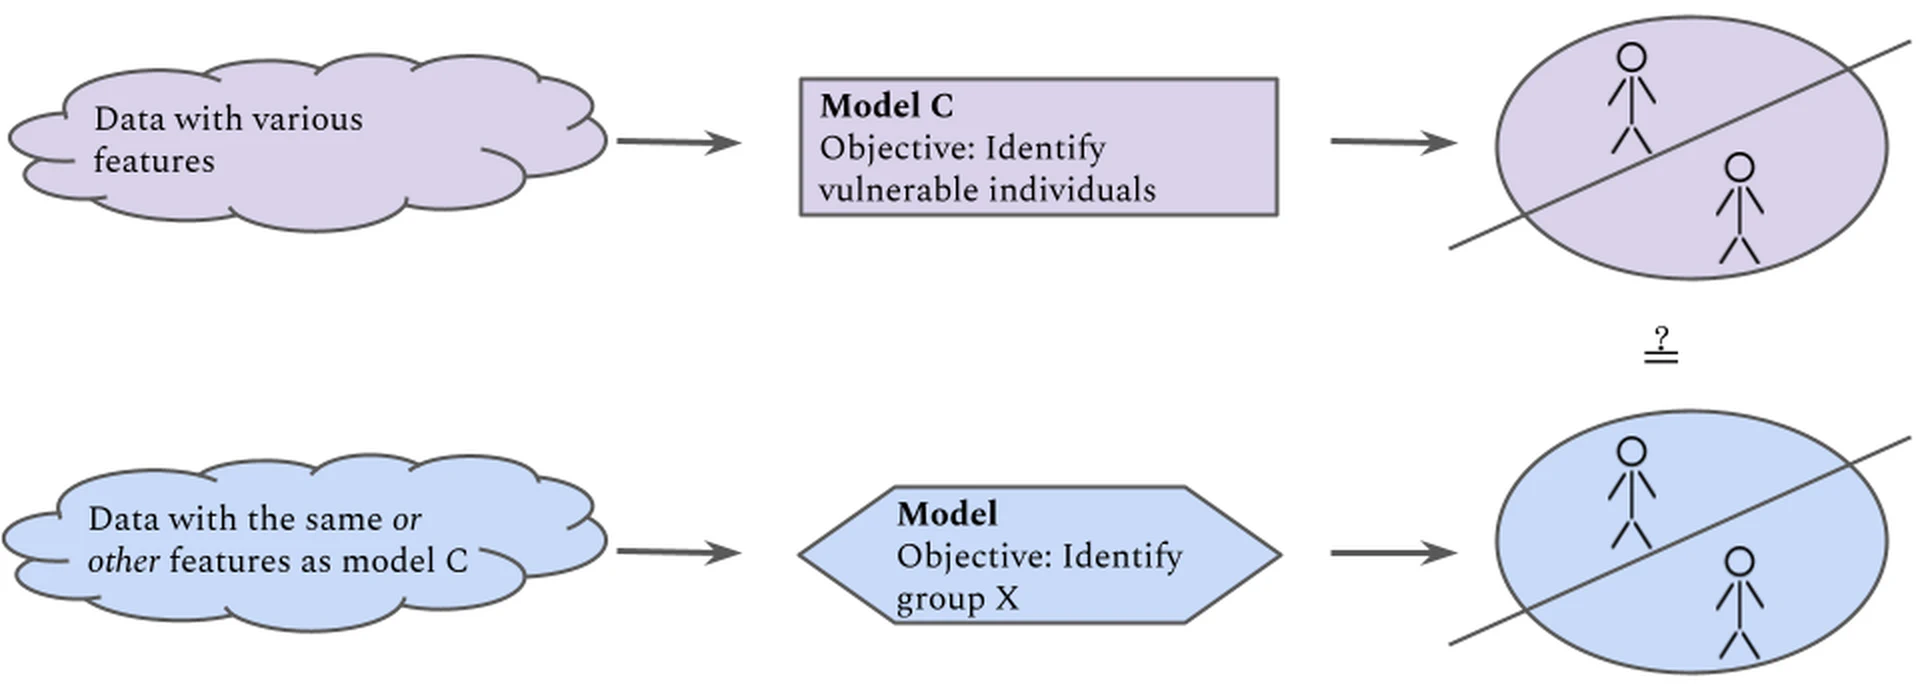  The model $C$ (top, purple), known to identify vulnerable individuals, can be used to test whether the model under scrutiny (bottom, blue) is likely to have modelled vulnerability in individuals in order to achieve its objective.